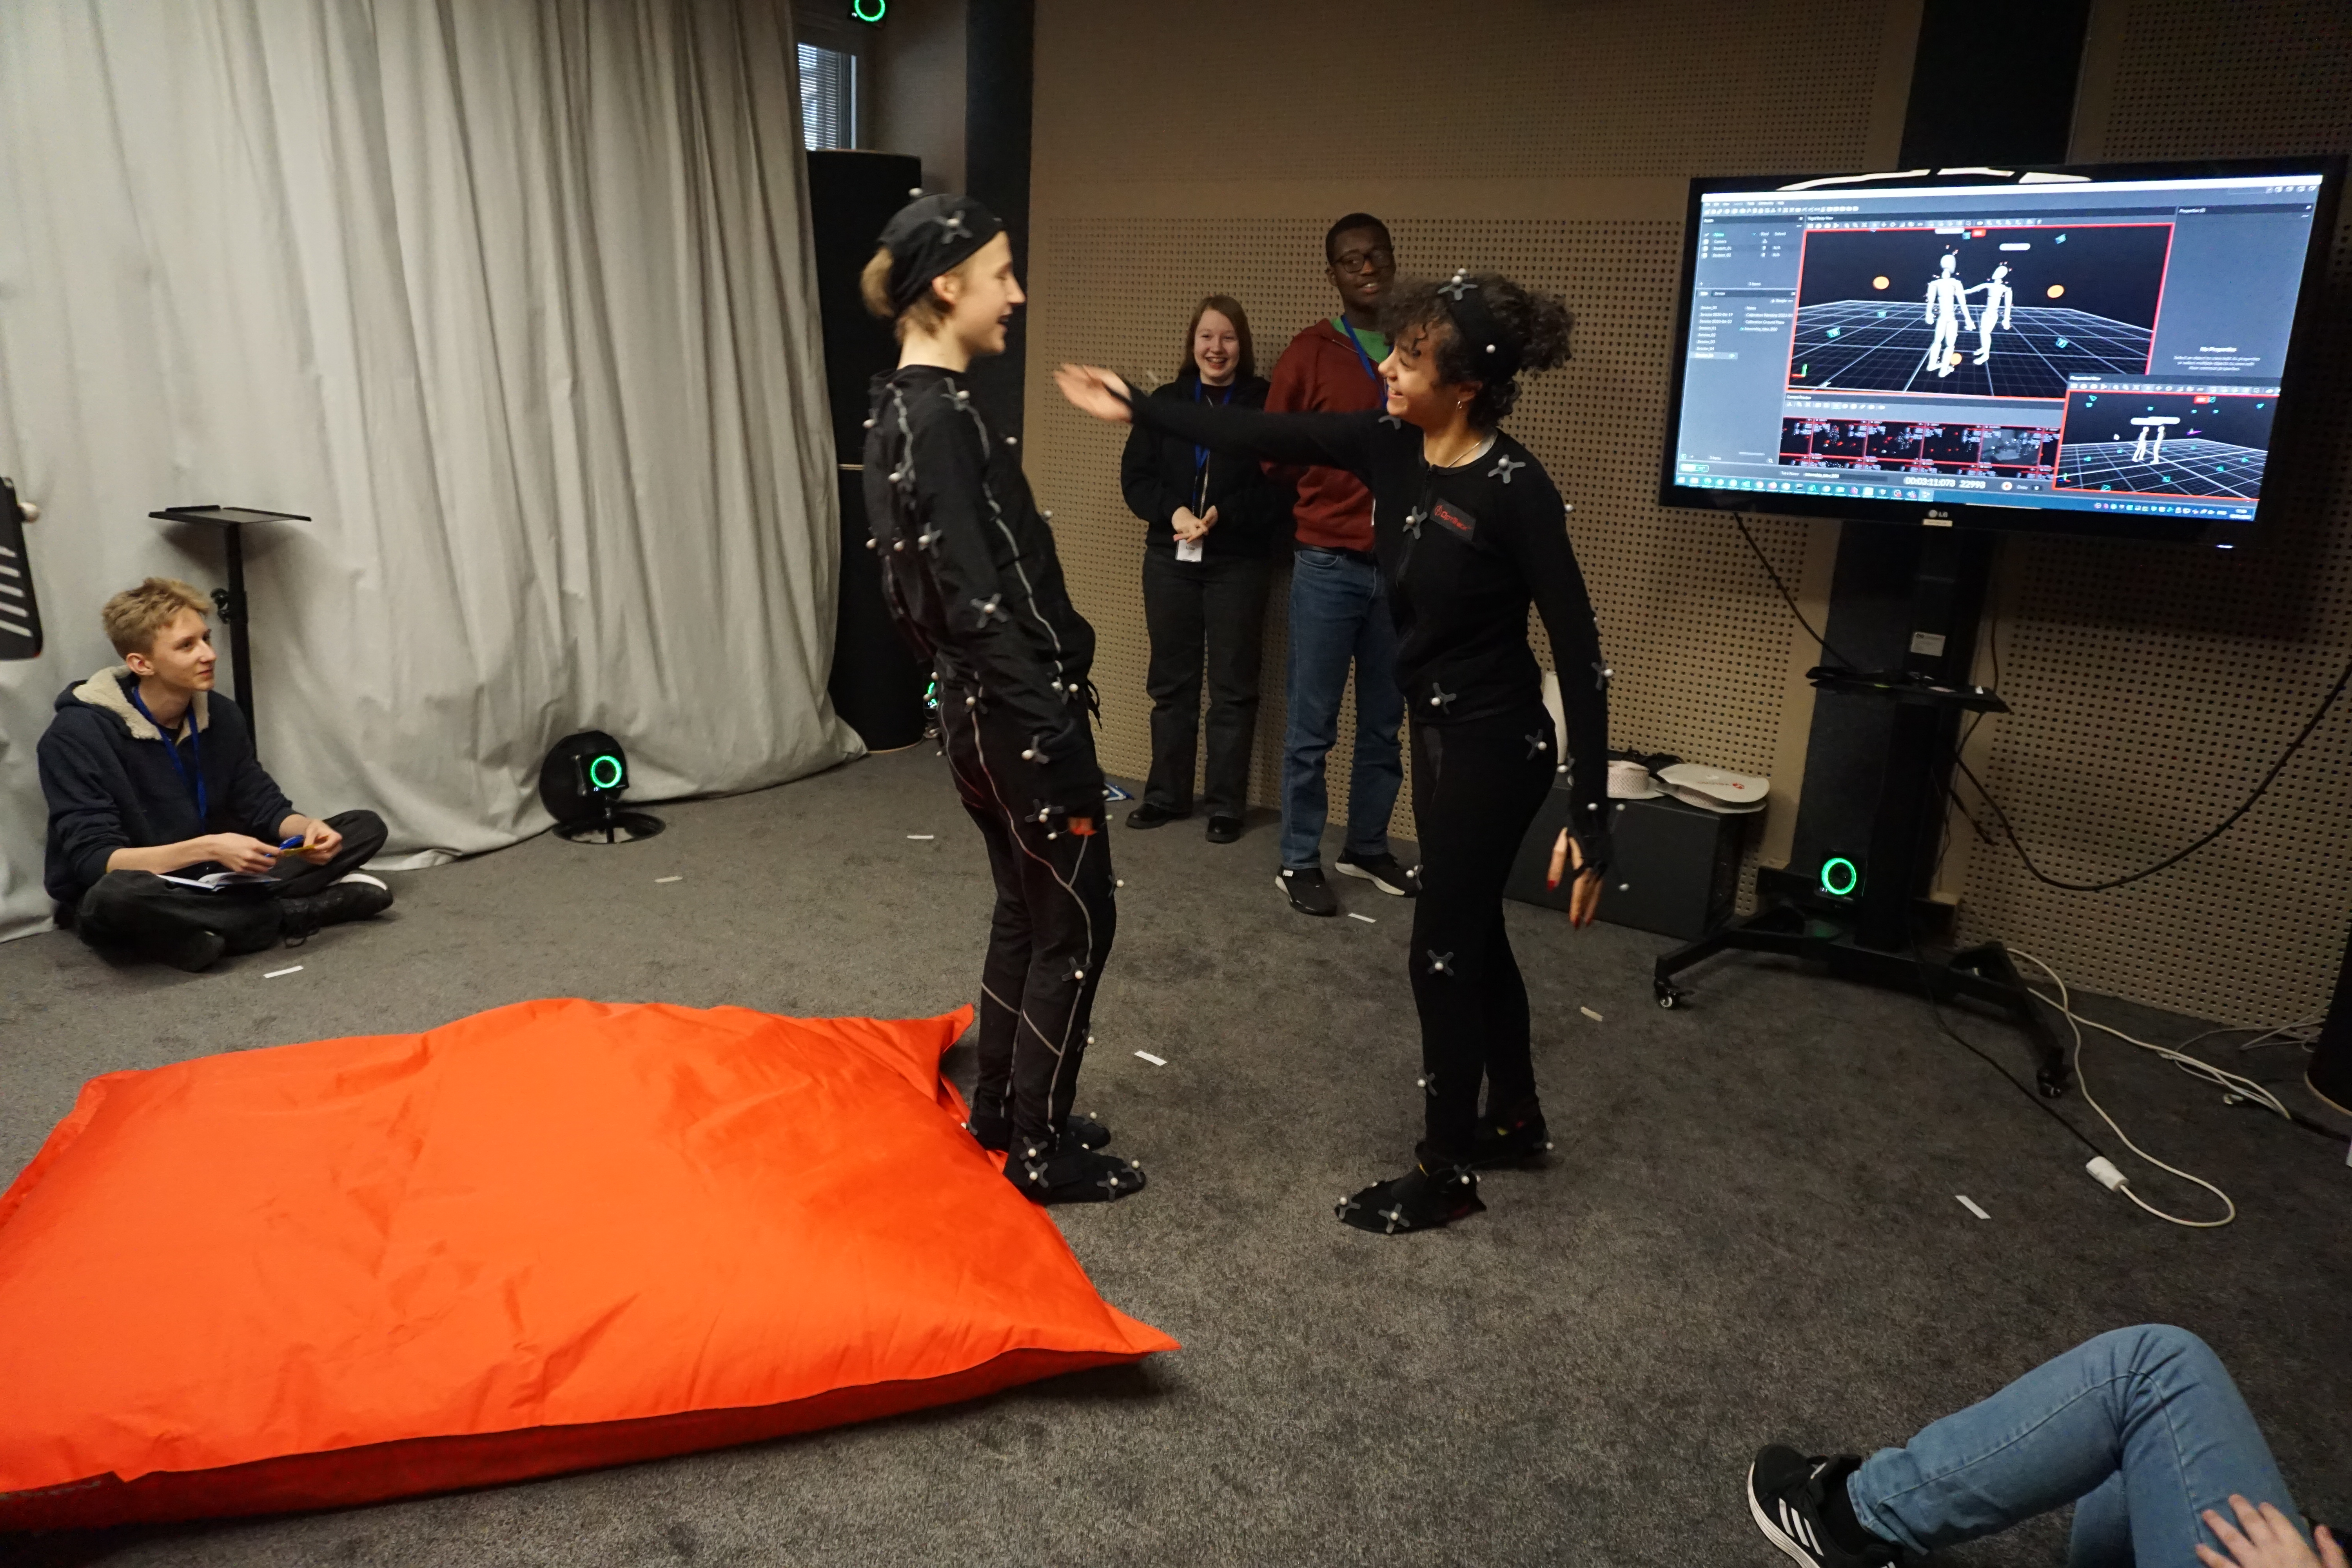 Motion Capturing in Aktion. Credit: Initiative Creative Gaming